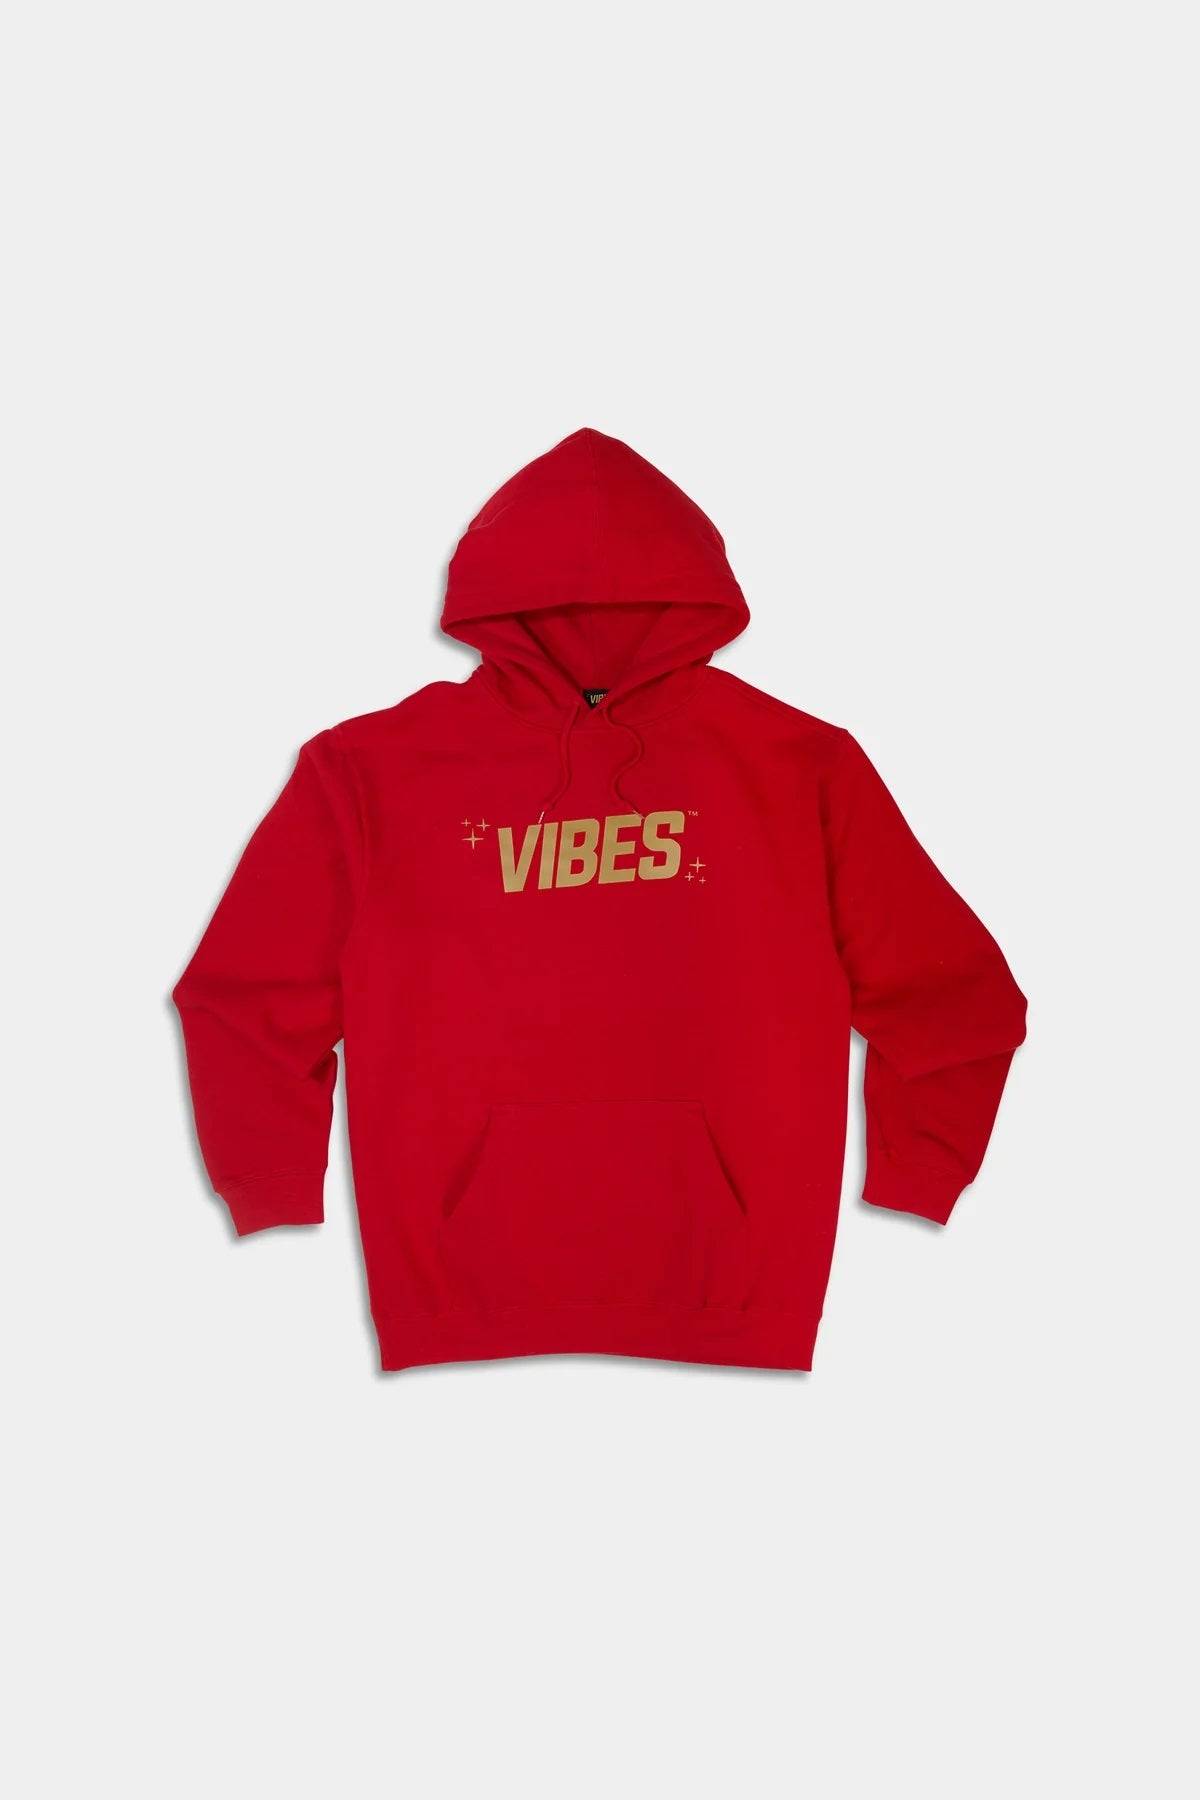 VIBES Red With Gold Logo Hoodie X-Large